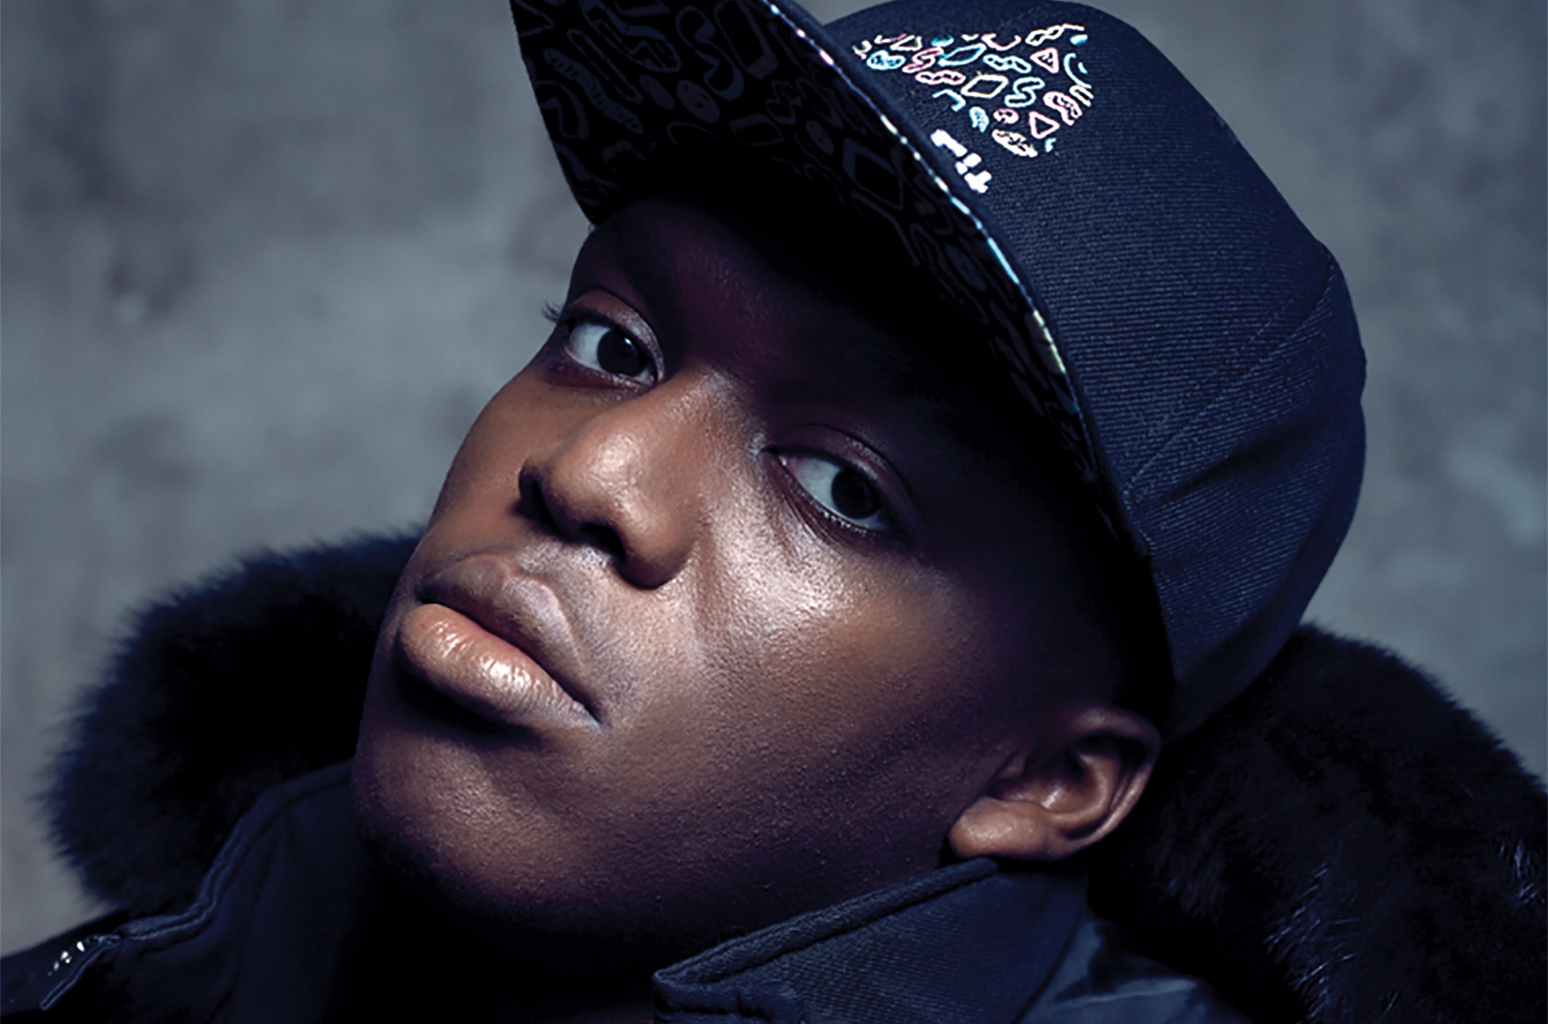 How British Rapper KSI Used a Boxing Match To Land His First Top 10 Hit